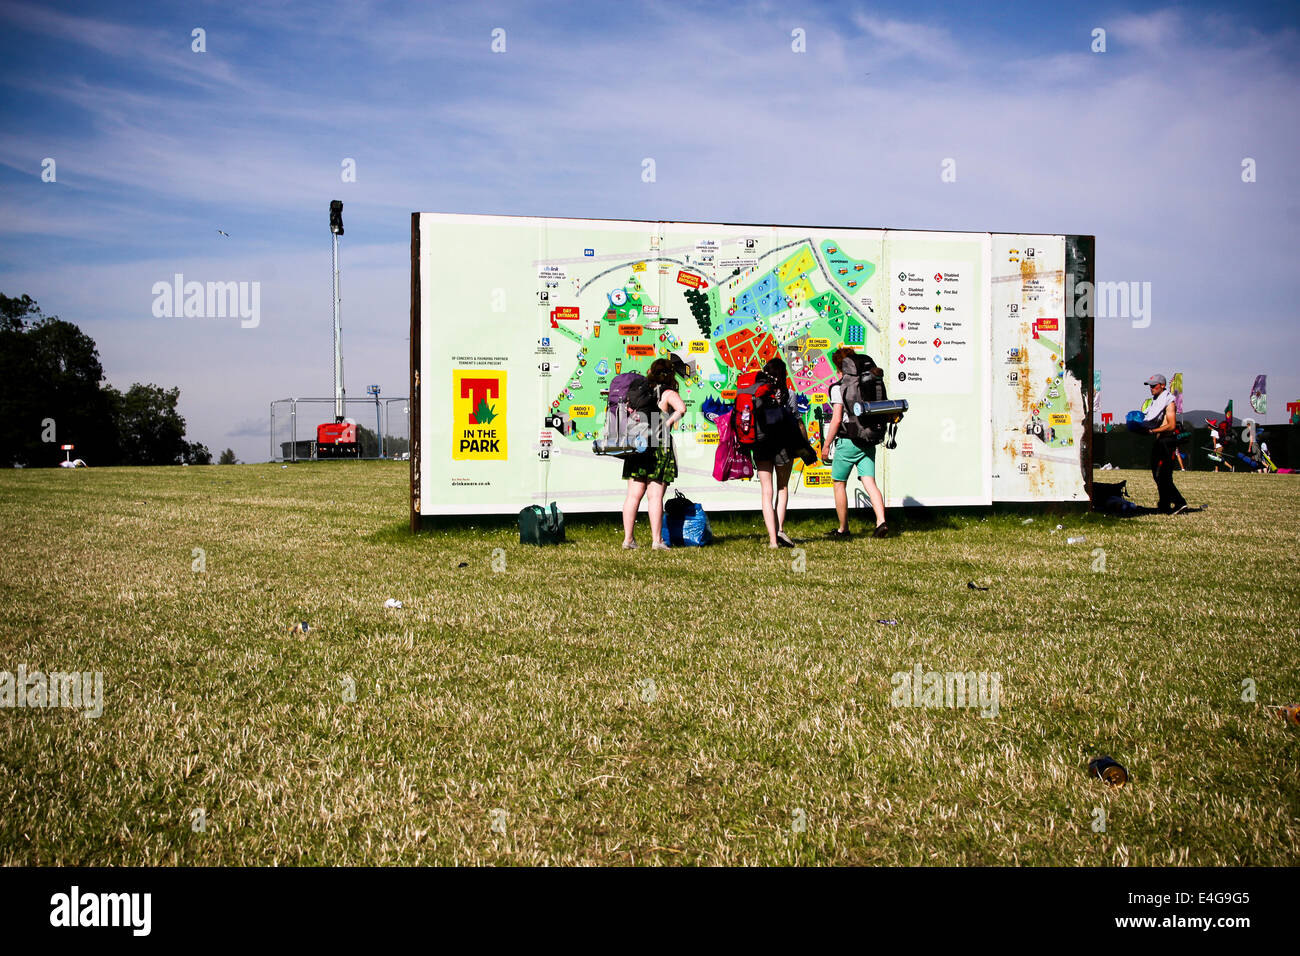 Balado, Kinross, Scotland, UK. 10th July, 2014. Early arrivals enjoying the welcome sunshine as they prepare for the weekend. Fans checking the site map Credit:  ALAN OLIVER/Alamy Live News Stock Photo